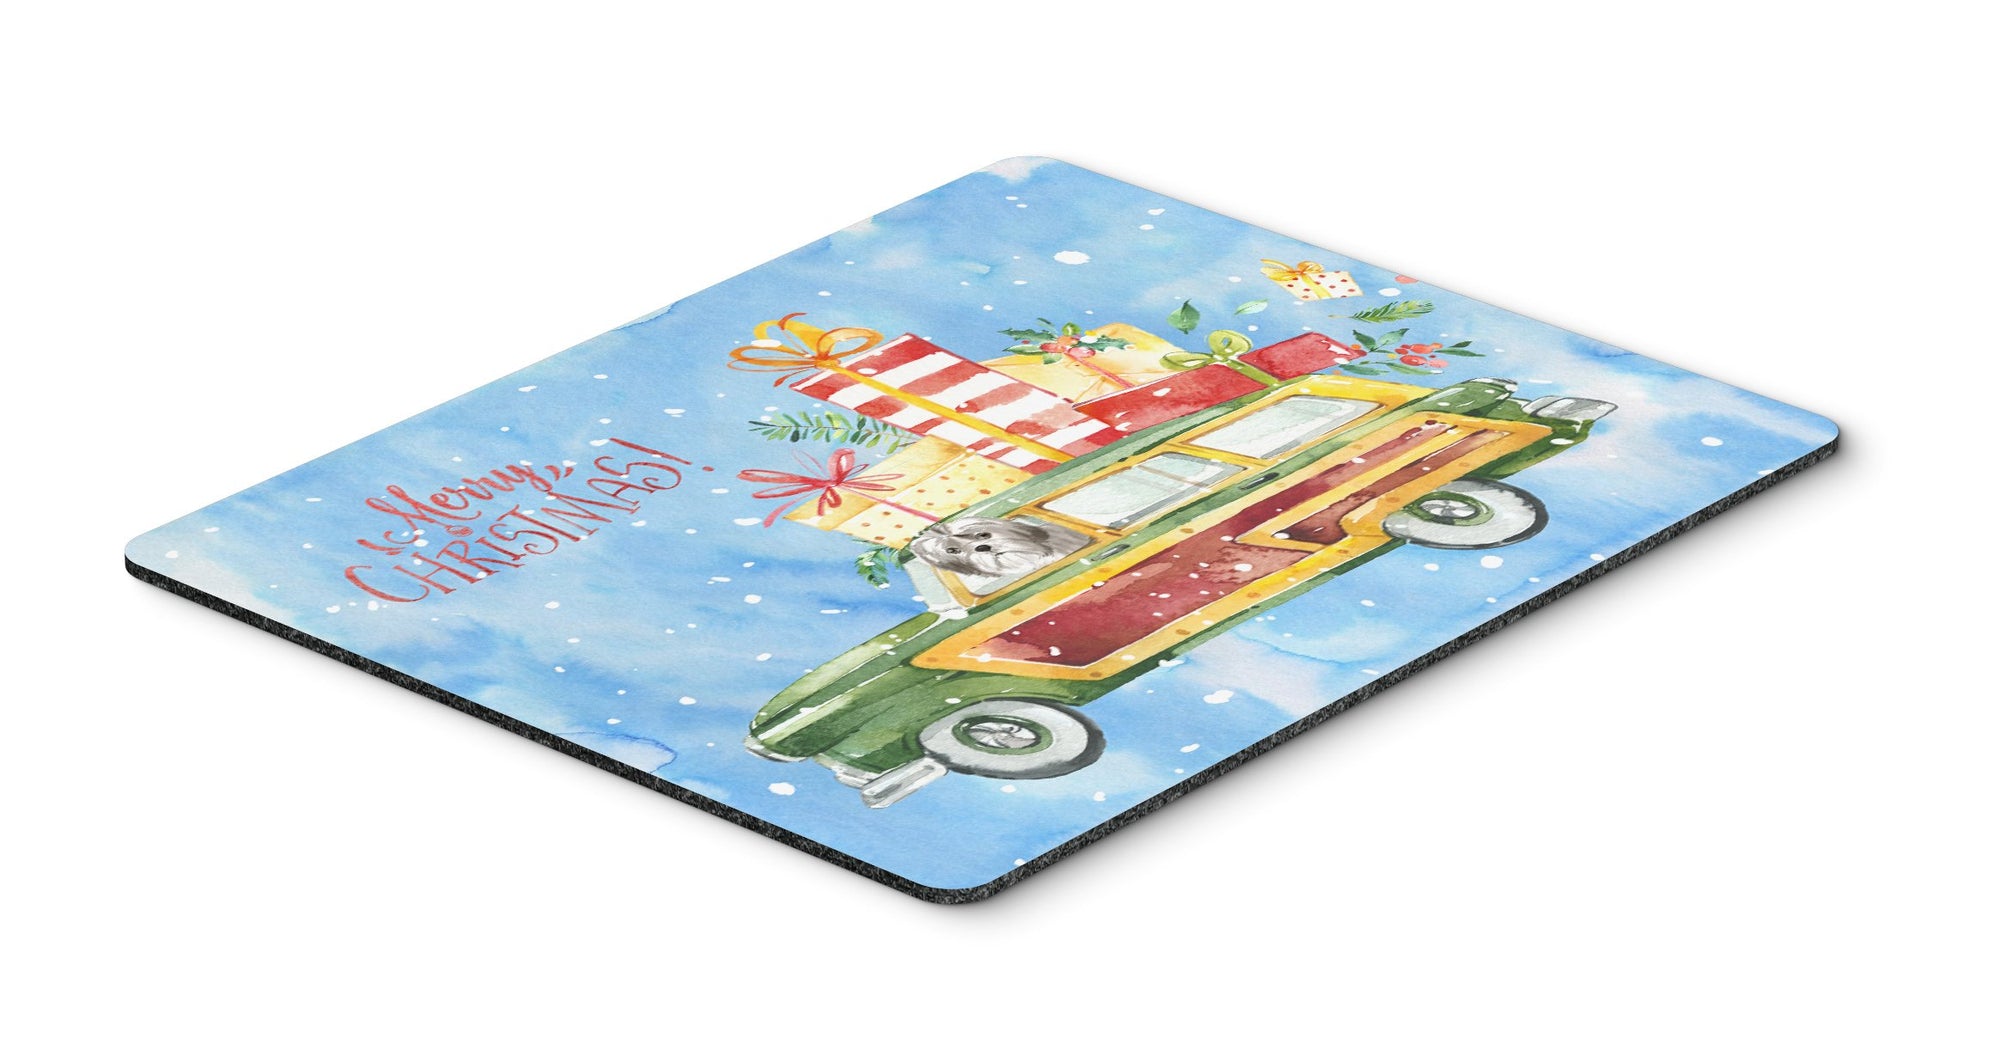 Merry Christmas Shih Tzu Puppy Cut Mouse Pad, Hot Pad or Trivet CK2423MP by Caroline's Treasures